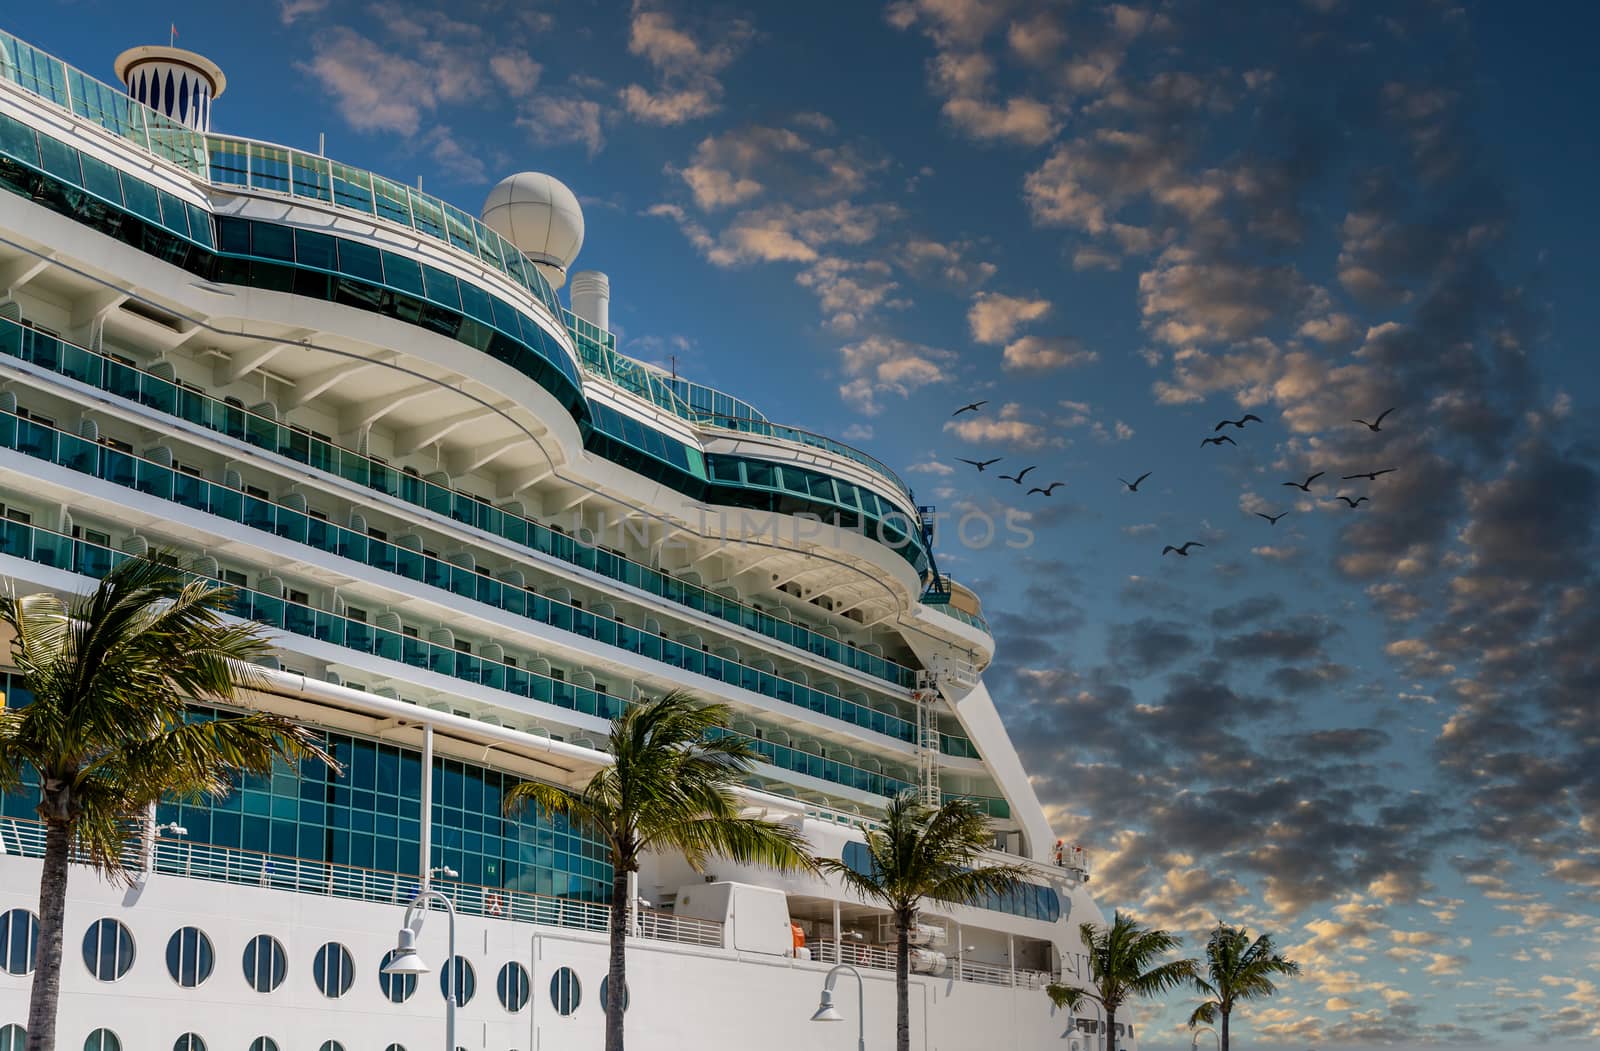 Luxury cruise ship docked under clear blue tropical skies